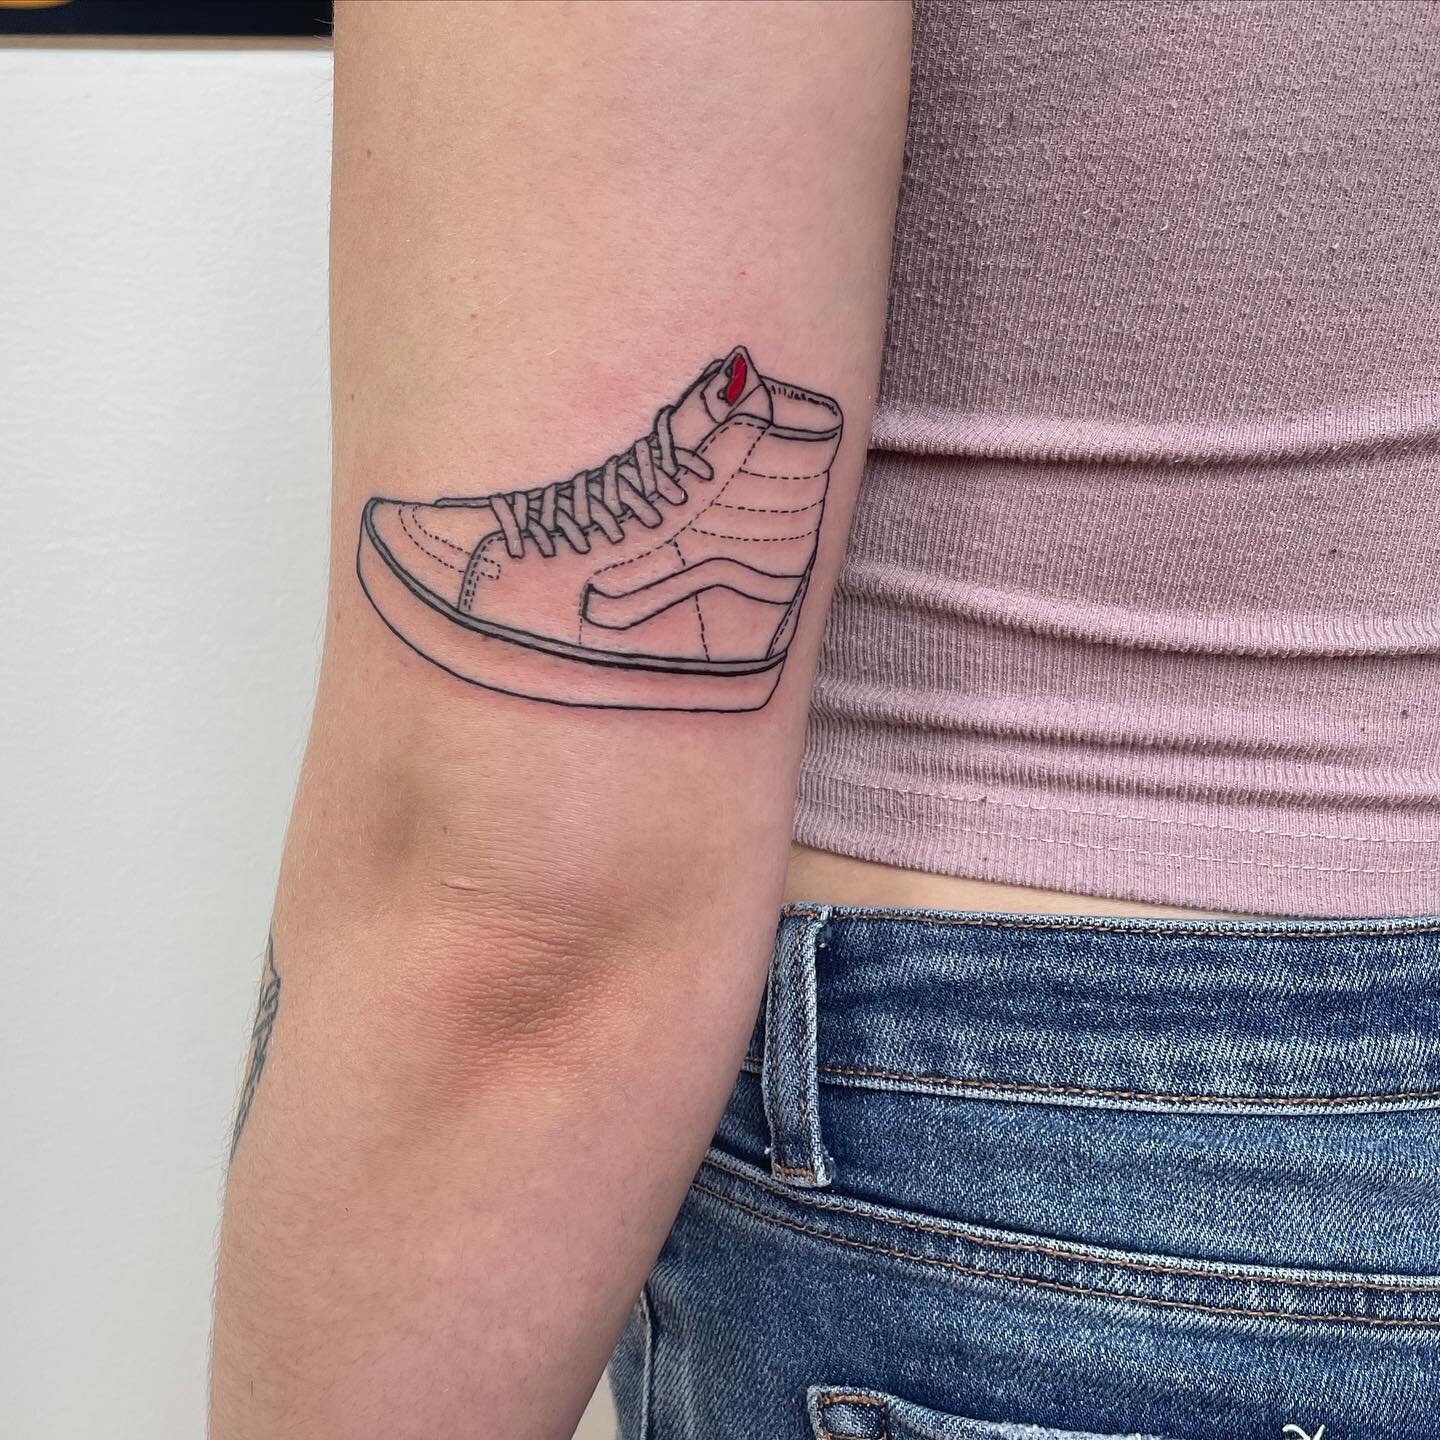 a little vans high top for @megan.luttrell, thanks for being awesome! always so much fun! ❤️

&mdash;&mdash;&mdash;&mdash;&mdash;&mdash;&mdash;&mdash;&mdash;&mdash;&mdash;&mdash;&mdash;&mdash;&mdash;&mdash;&mdash;&mdash;&mdash;&mdash;

#tattoo #tatto